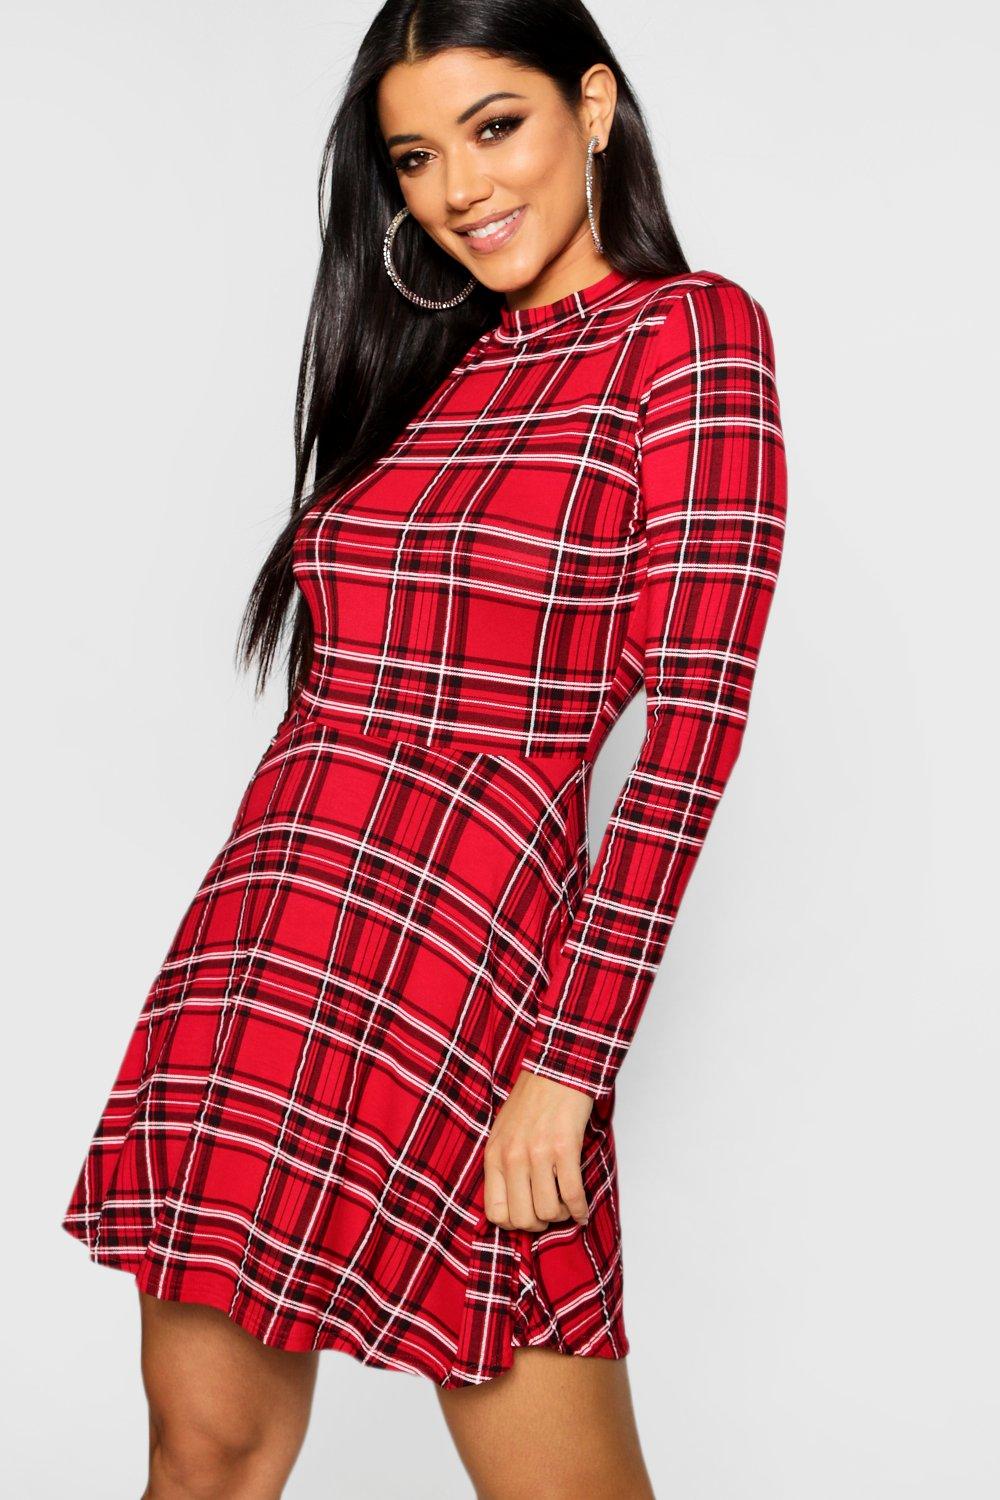 boohoo fit and flare dress